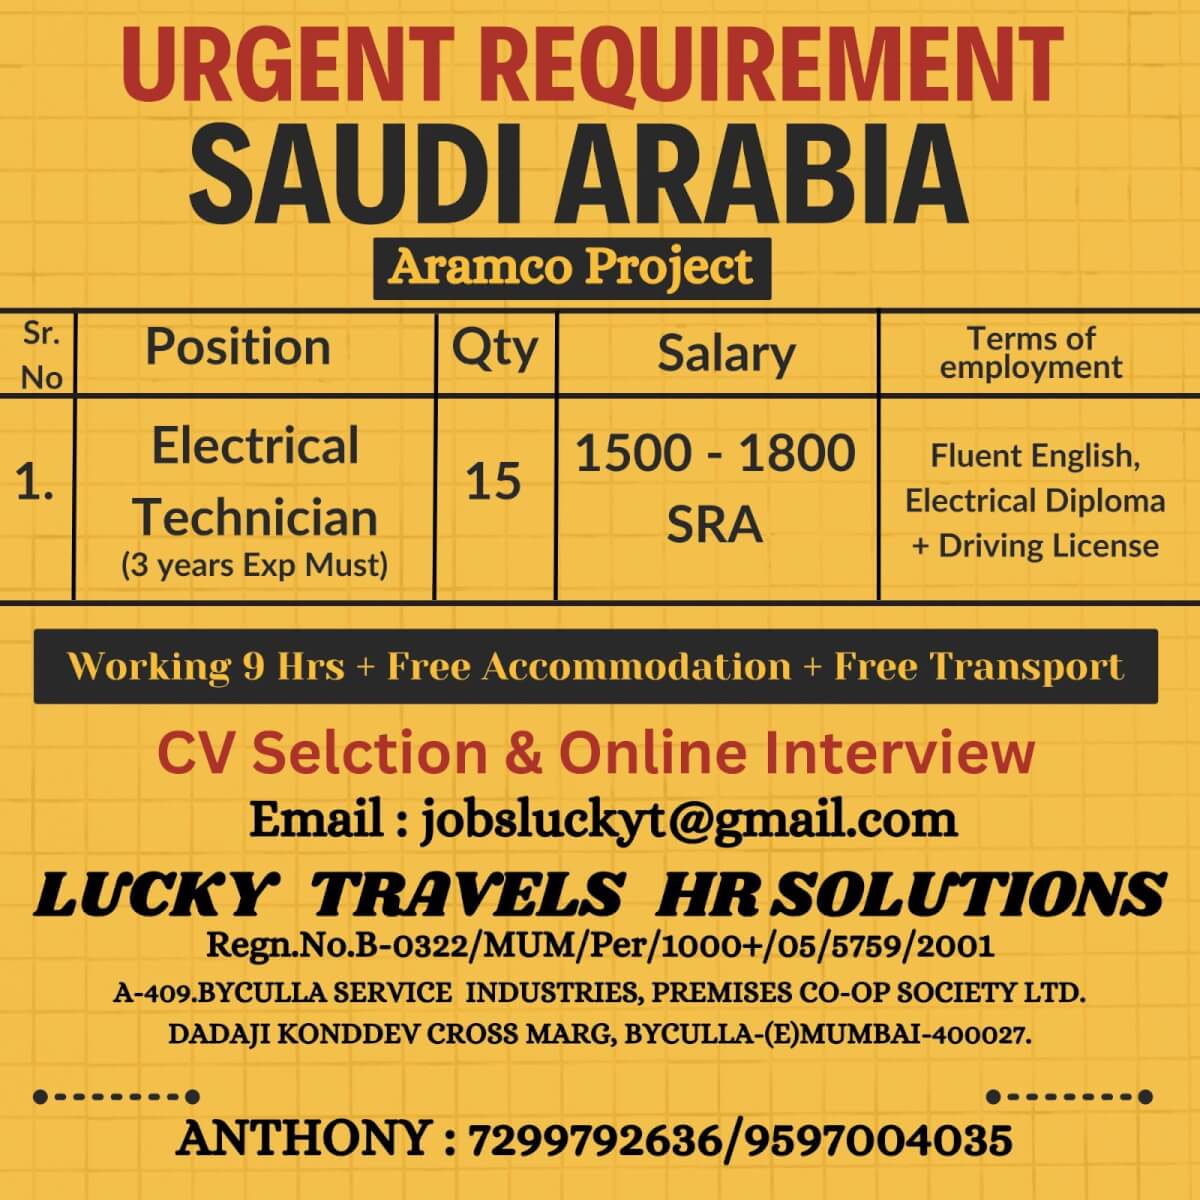 HIRING FOR ARAMCO PROJECT FOR SAUDI / CV SHORTLISTING & ONLINE INTERVIEW CONTACT MR.ANTHONY 7299792636